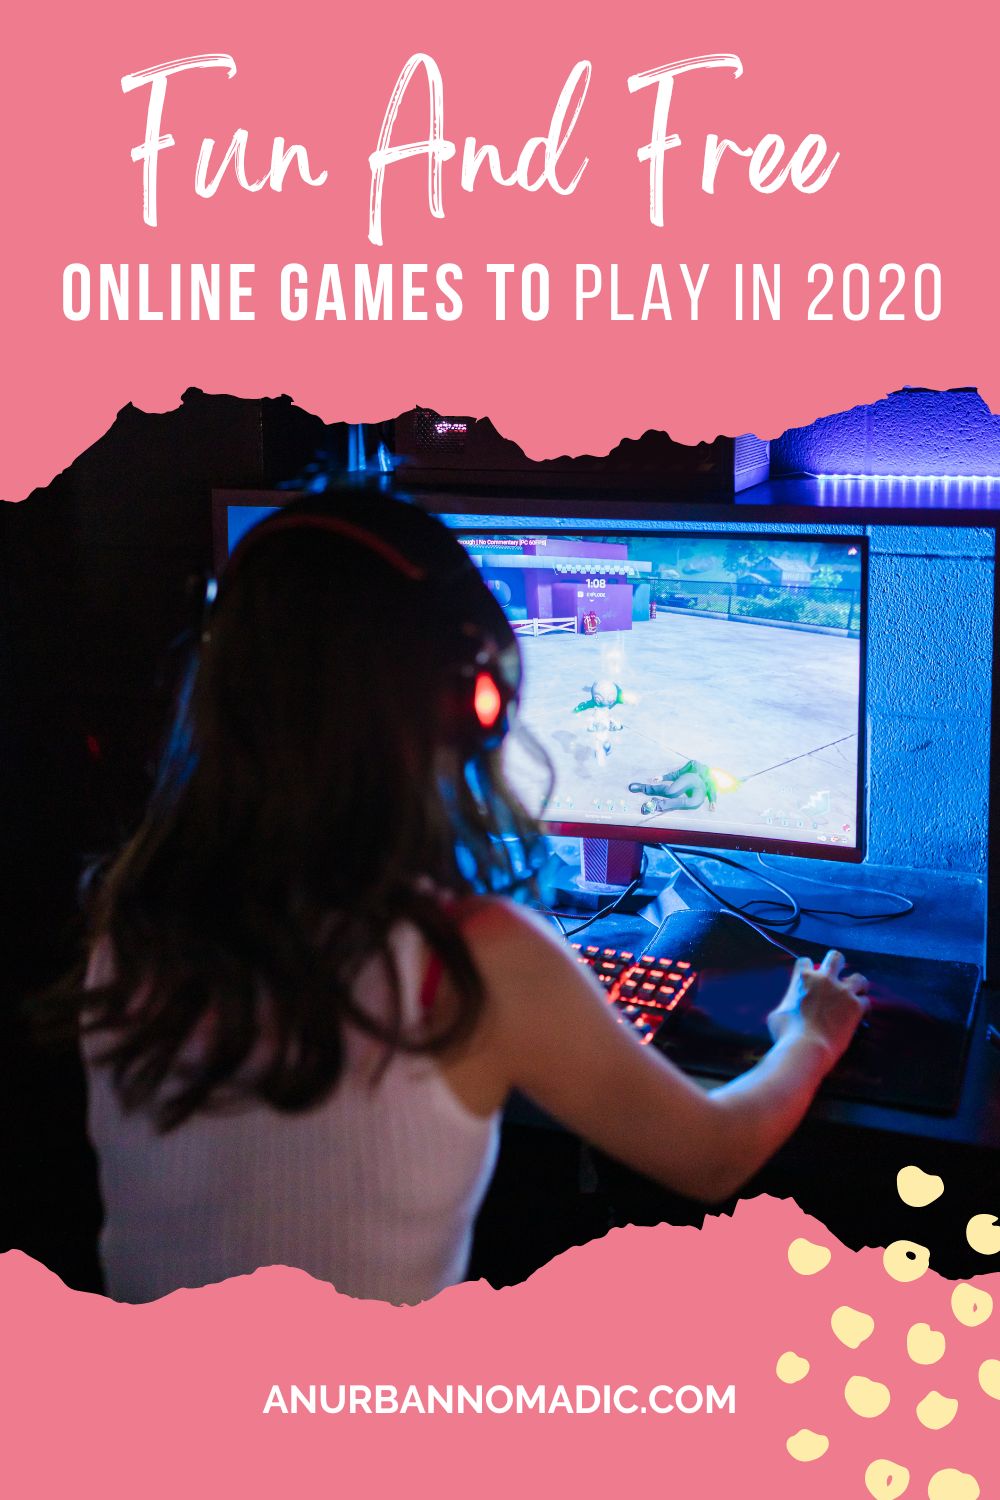 Where to Play Free Online Games without Ads? Good & Safe Online